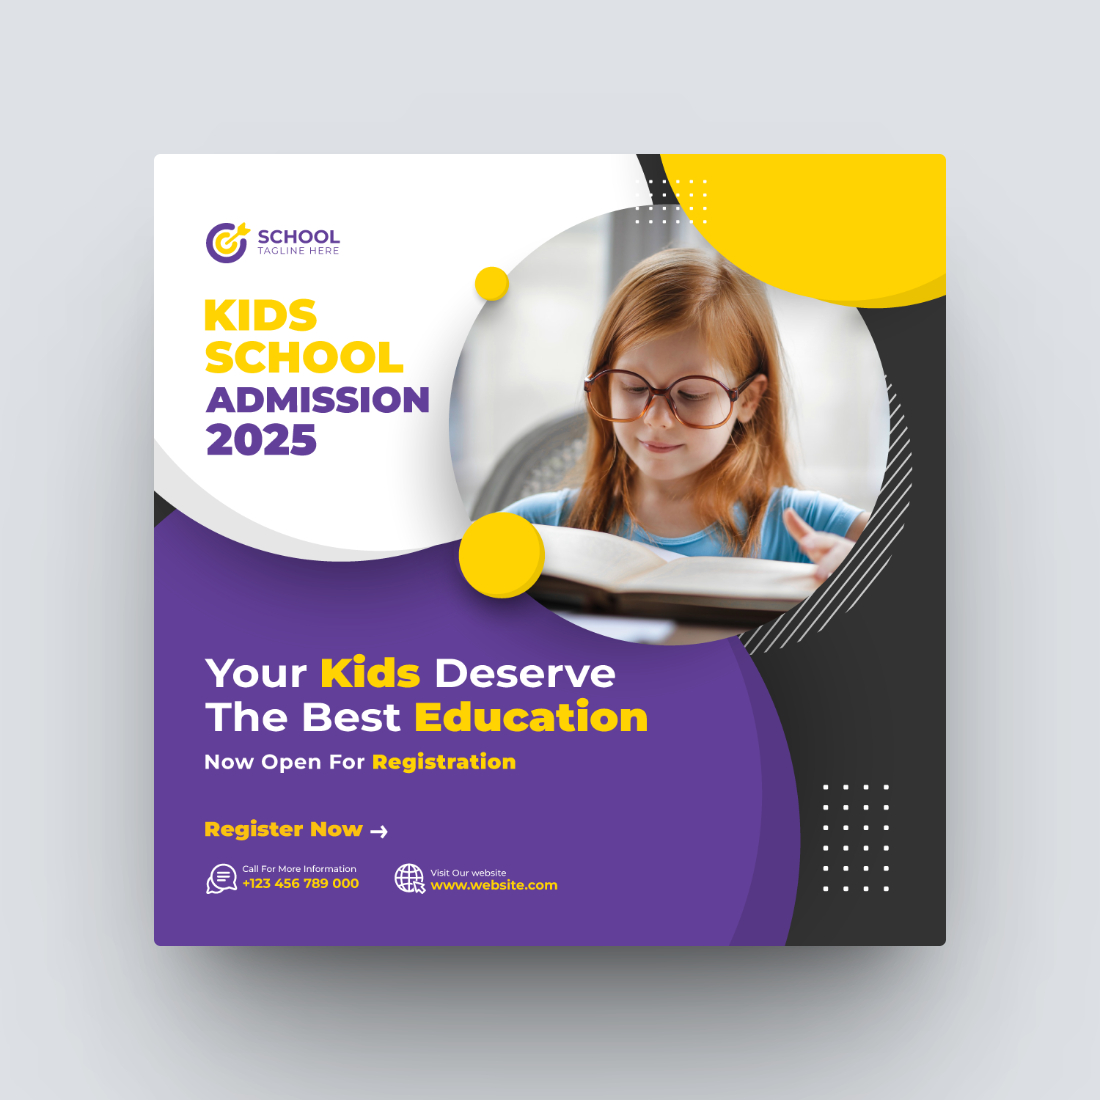 School Admission Or Kids Education Social Media Post Template cover image.